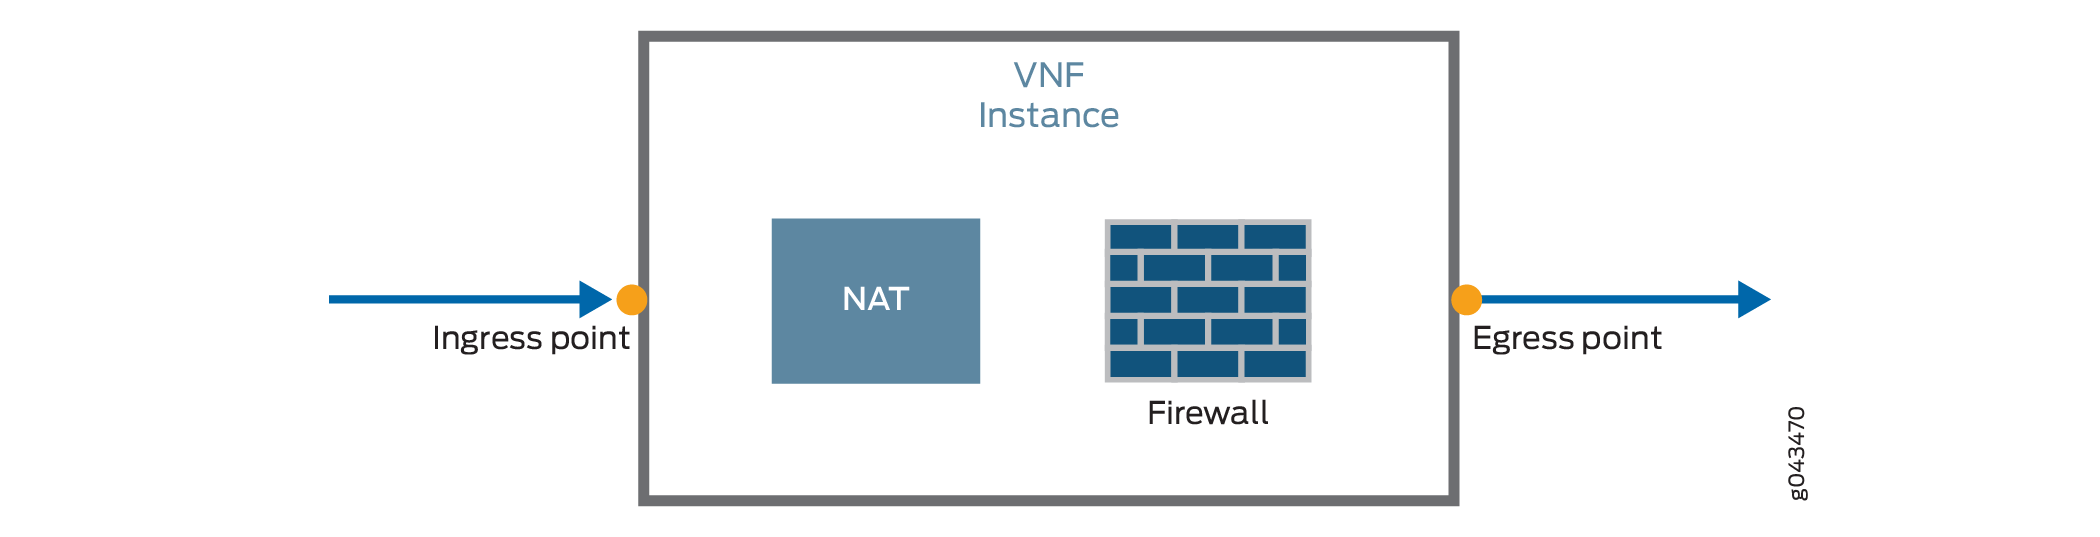 Service Chain with One VNF Instance
That Provides All Functions